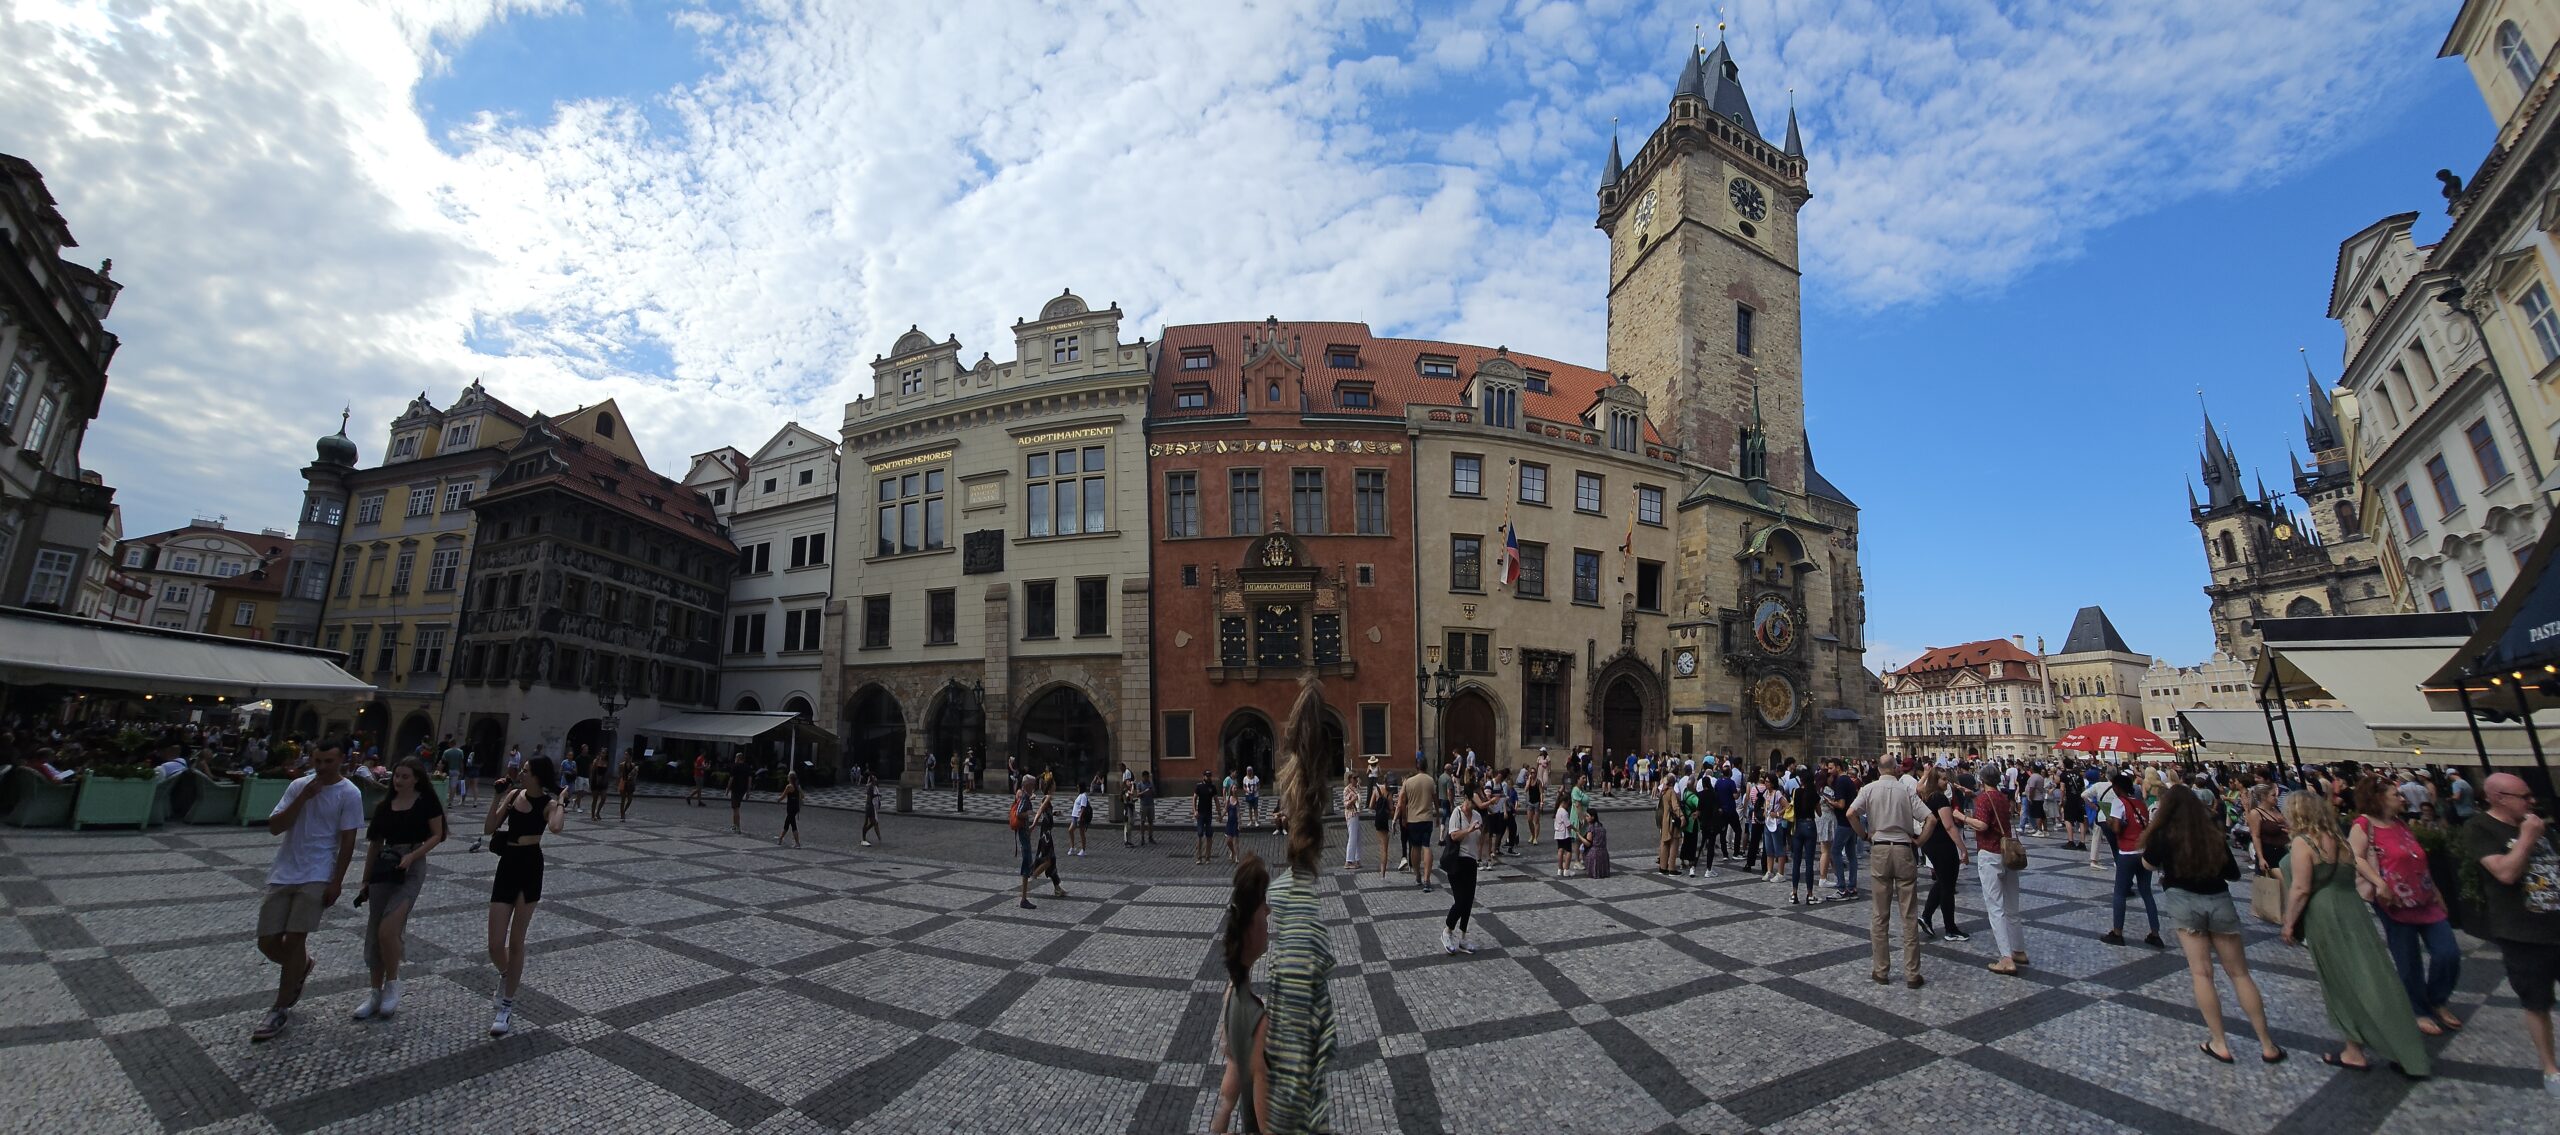 Old Town Square (Staroměstské náměstí) showing the Prague Astronomical Clock and peopel walking around. Blue sky with some wispy clouds in the sky. Image by 360onhistory.com